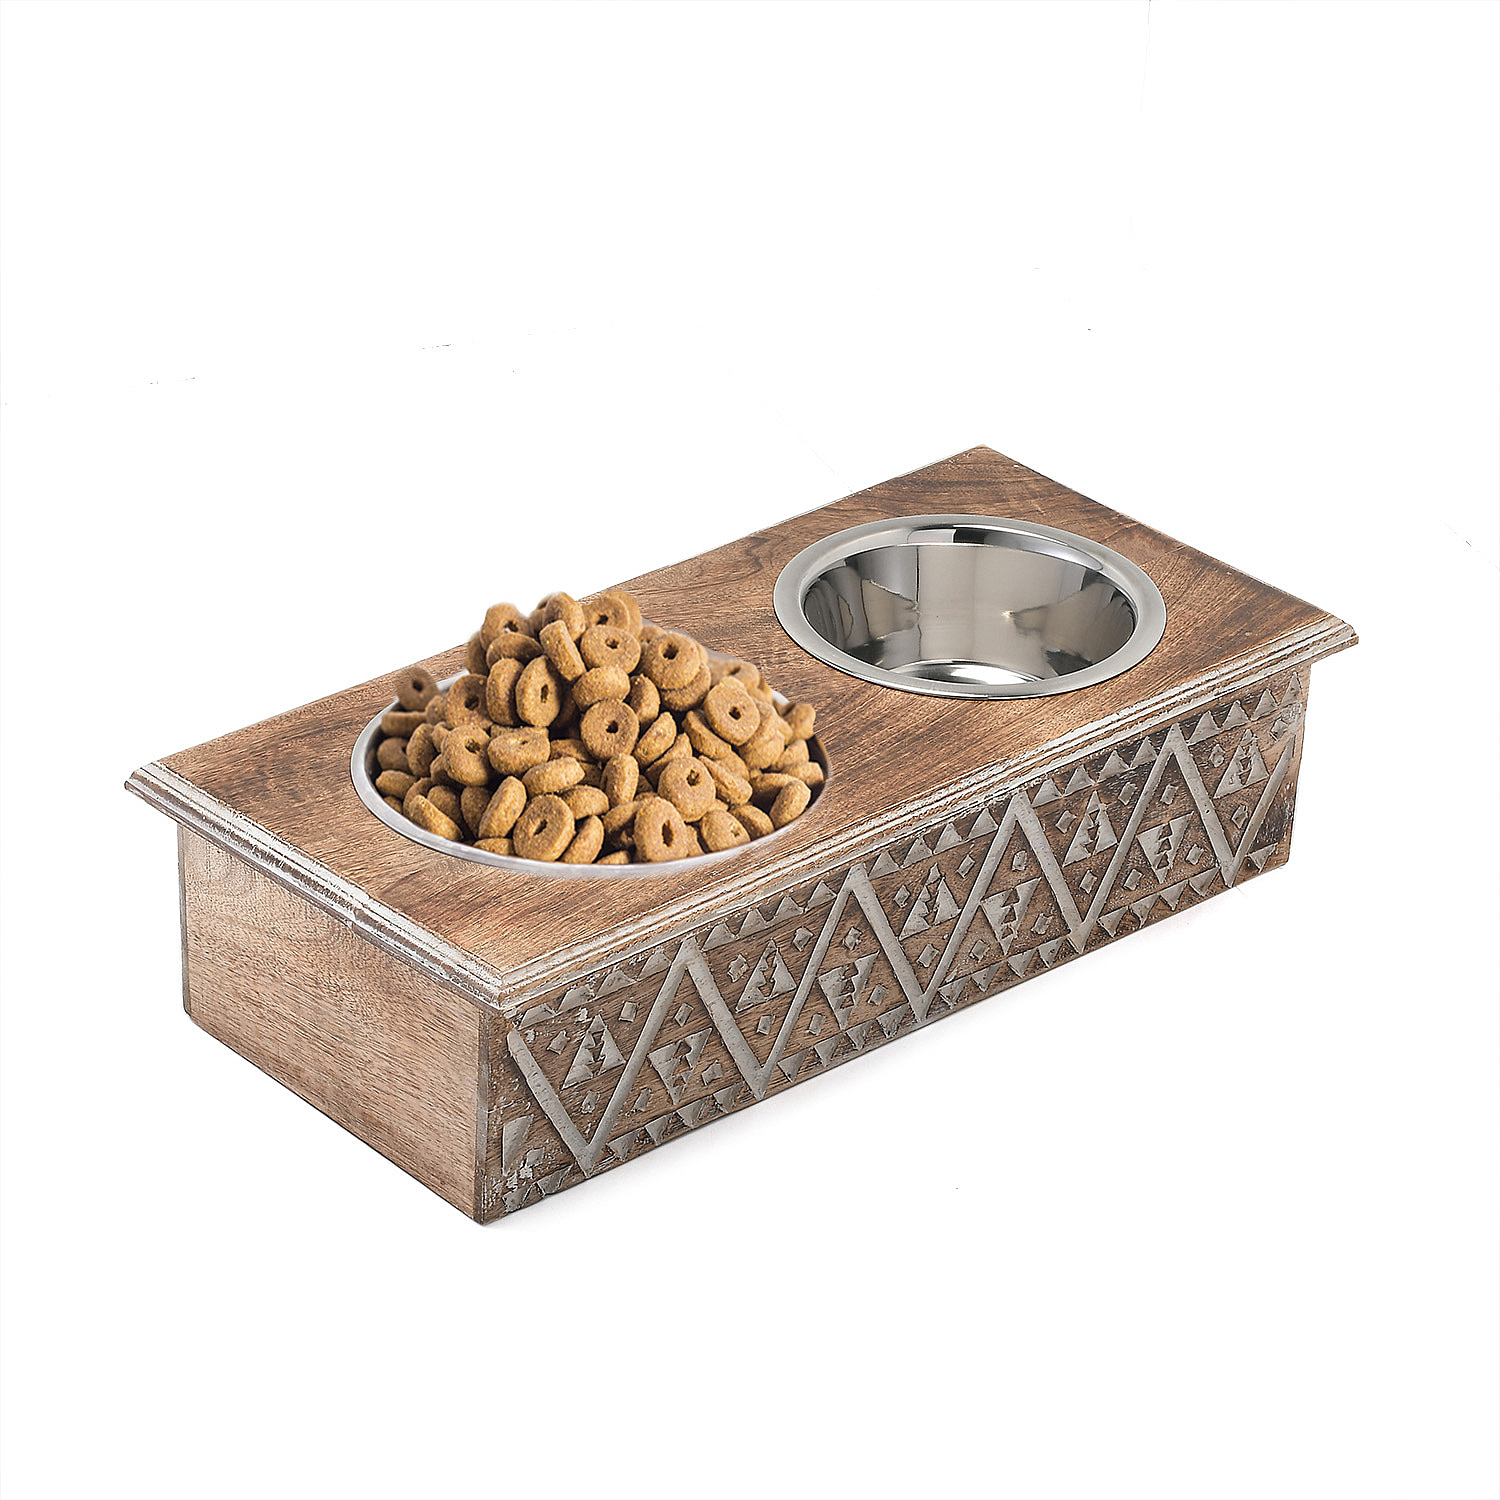 NAKKASHI Hand Carved Mango Wood Pet Feeder with Stainless Steel Bowls